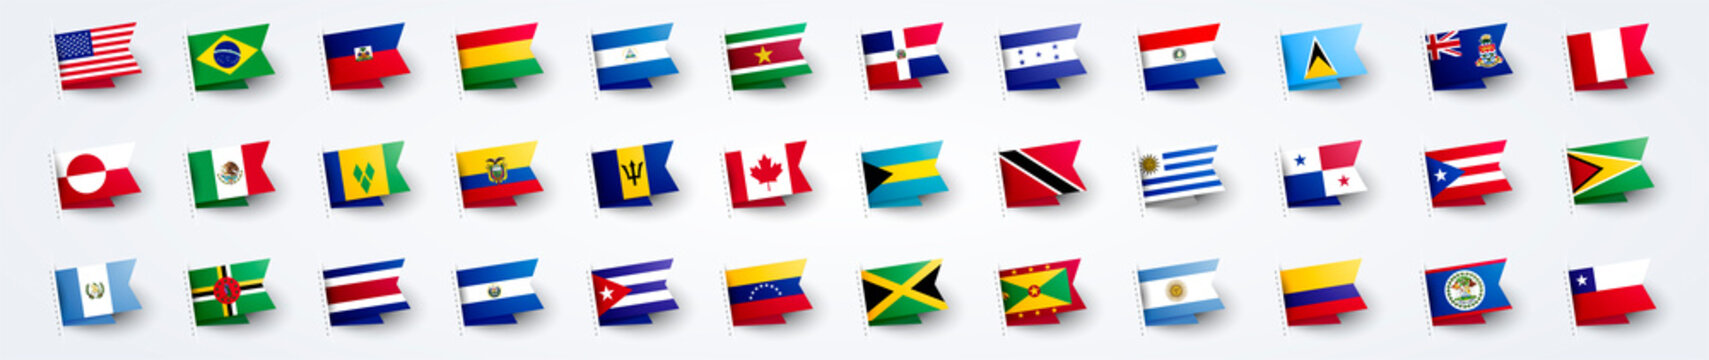 Vector Illustration Giant Flag Set Of South And North America